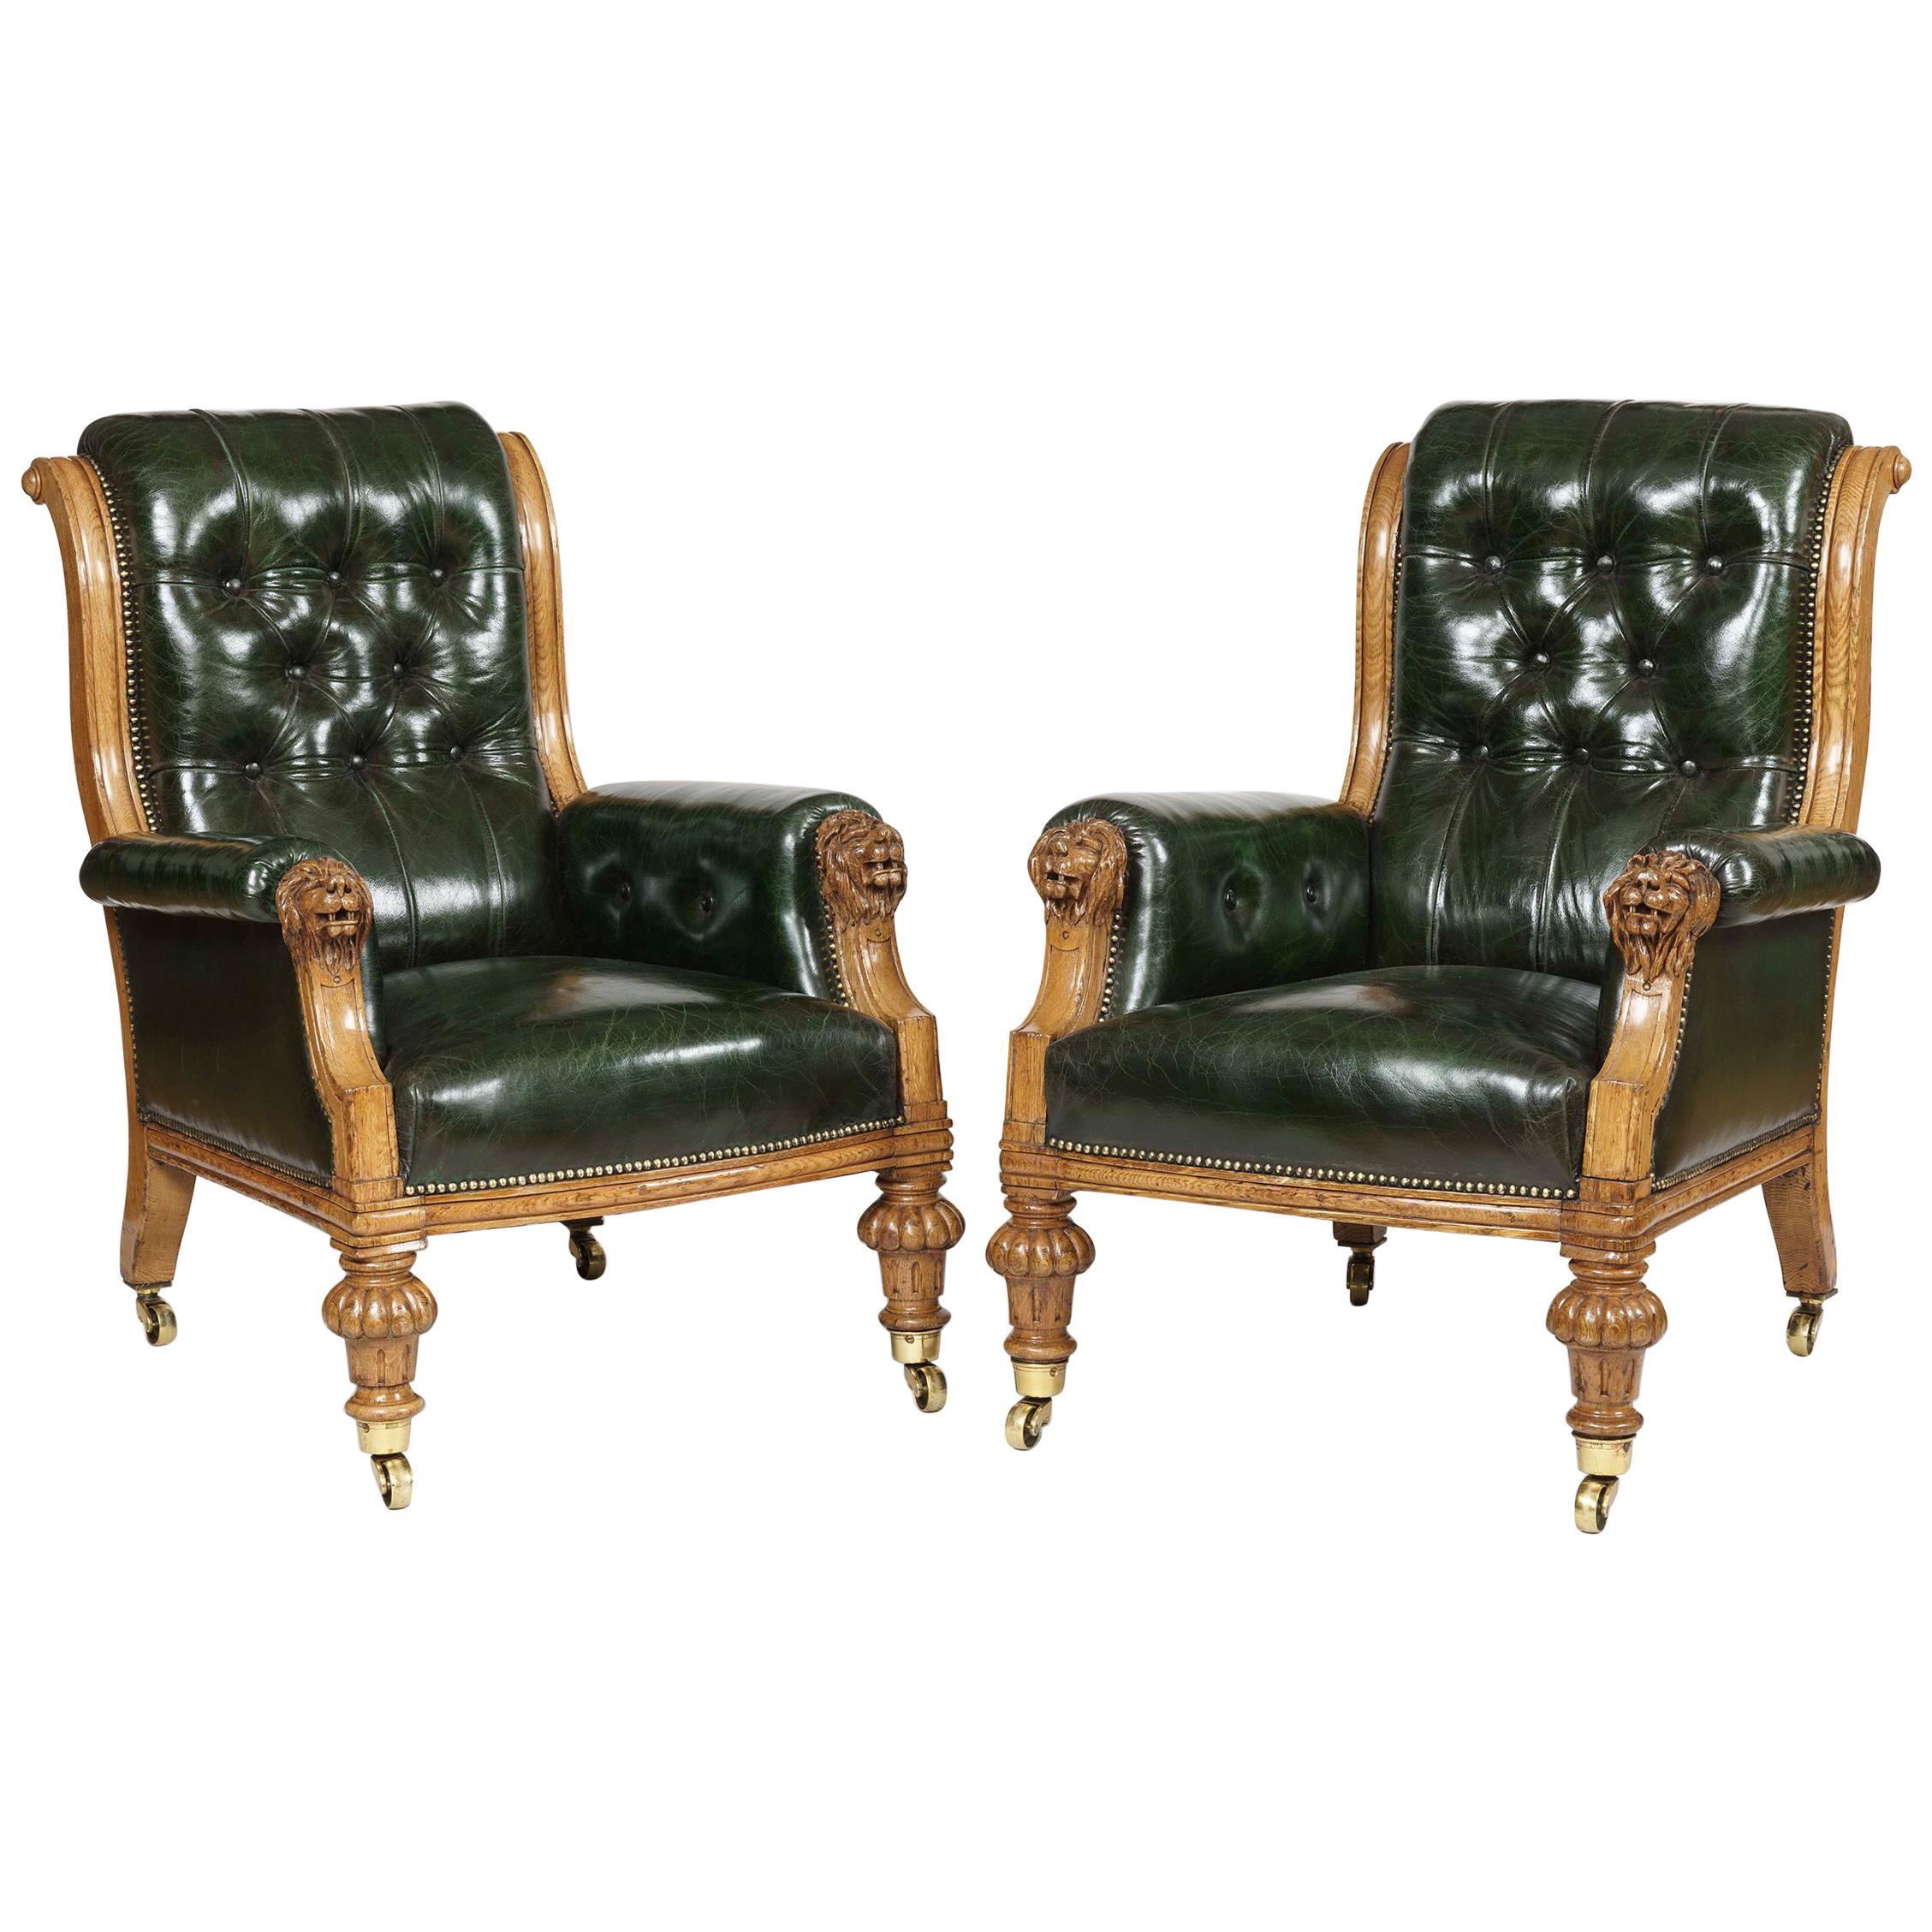 Pair of Green Leather St James's Club Library Armchairs of the late 19th Century